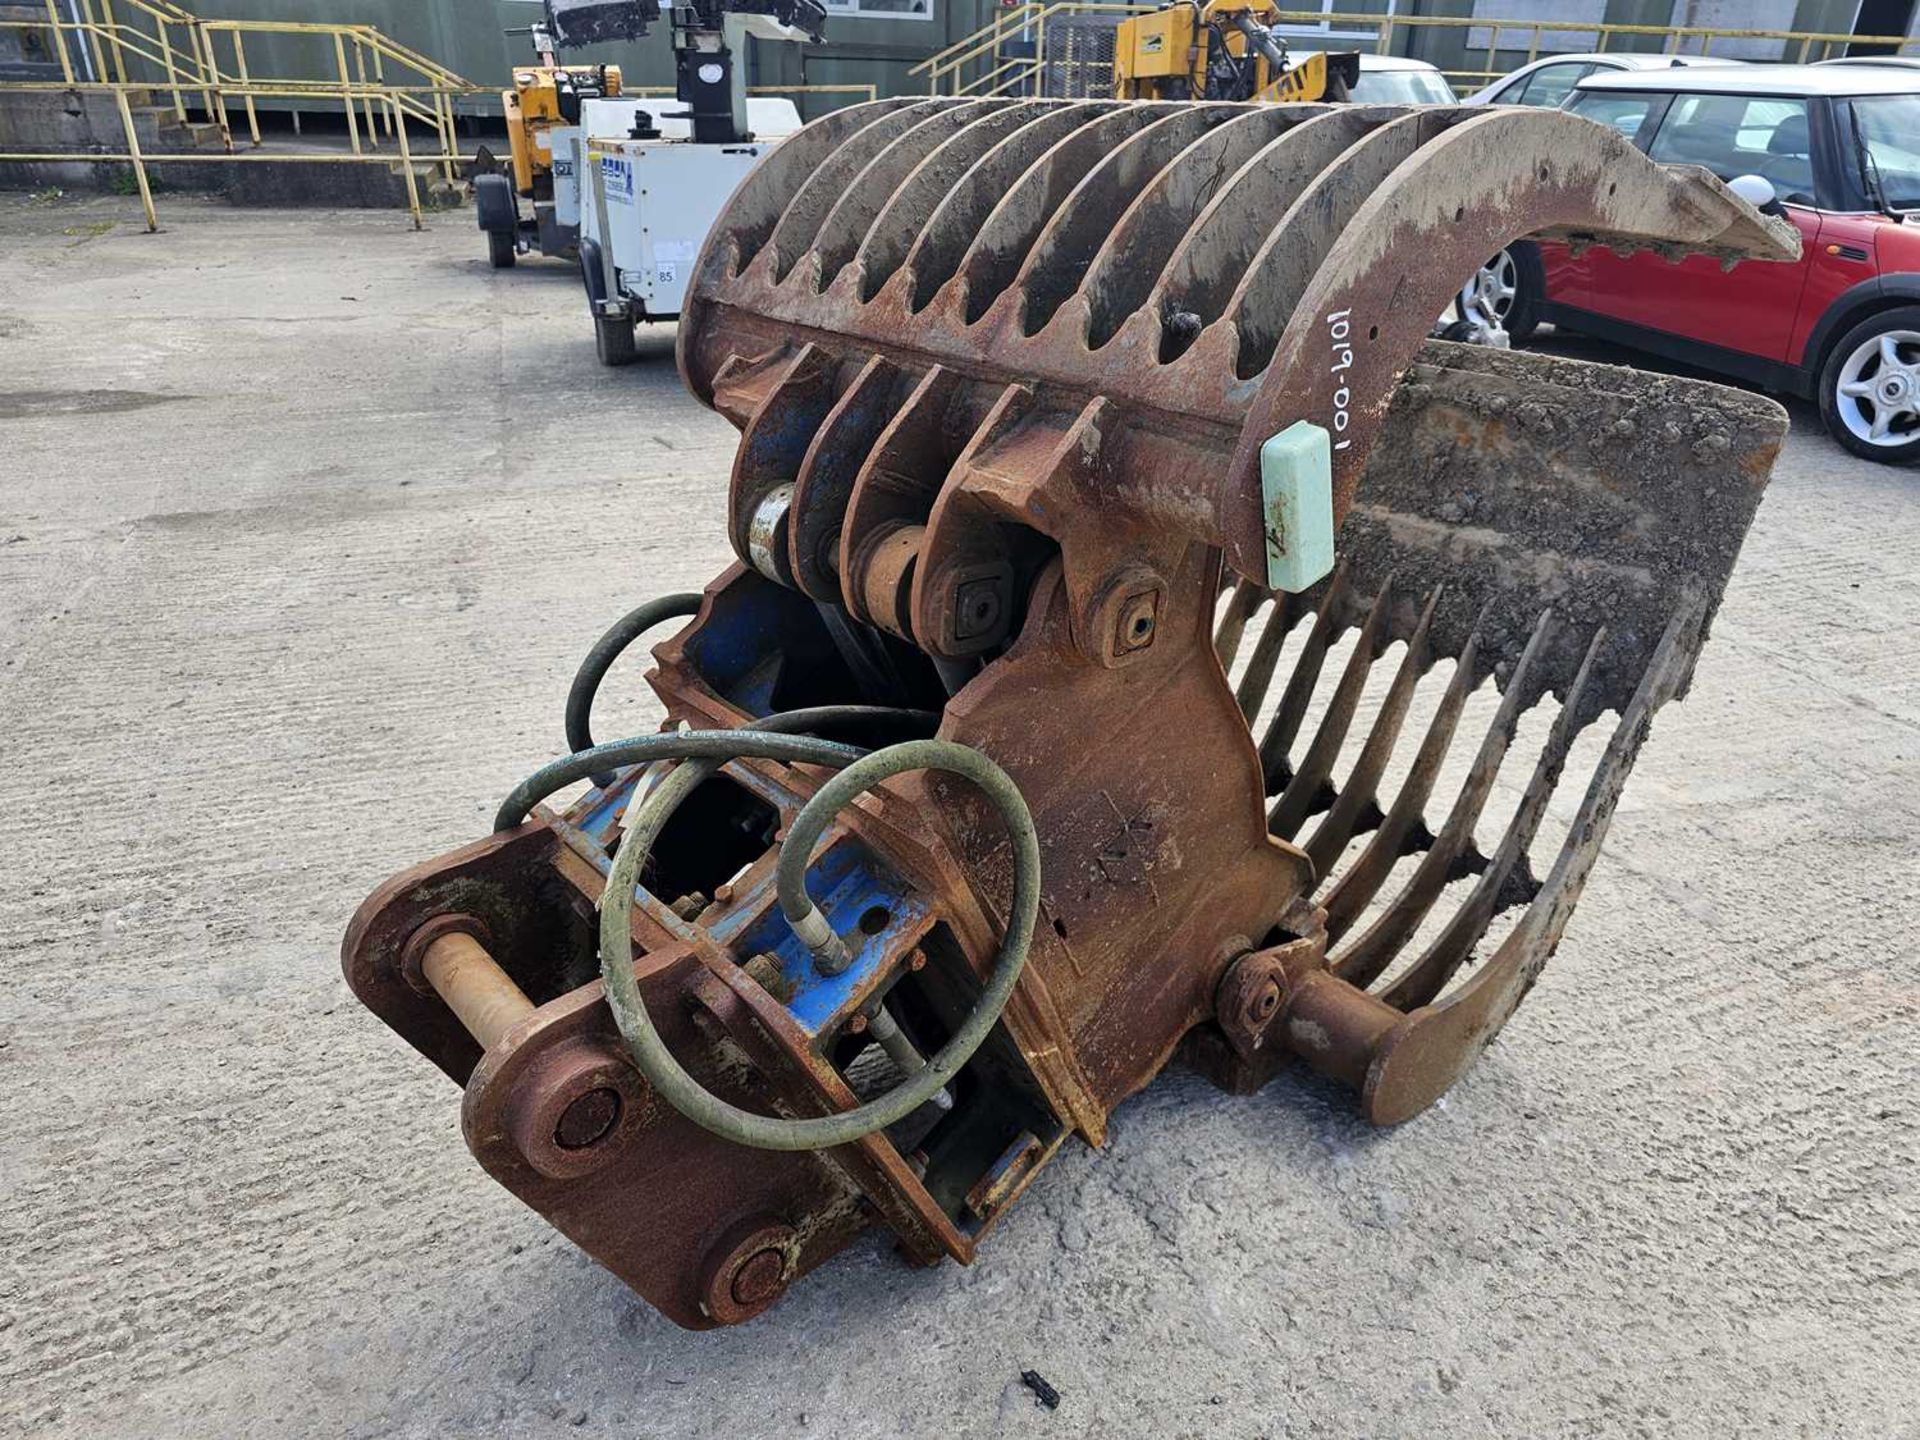 Arden S1100 Hydraulic Selector Grab 65mm Pin to suit 13 Ton Excavator